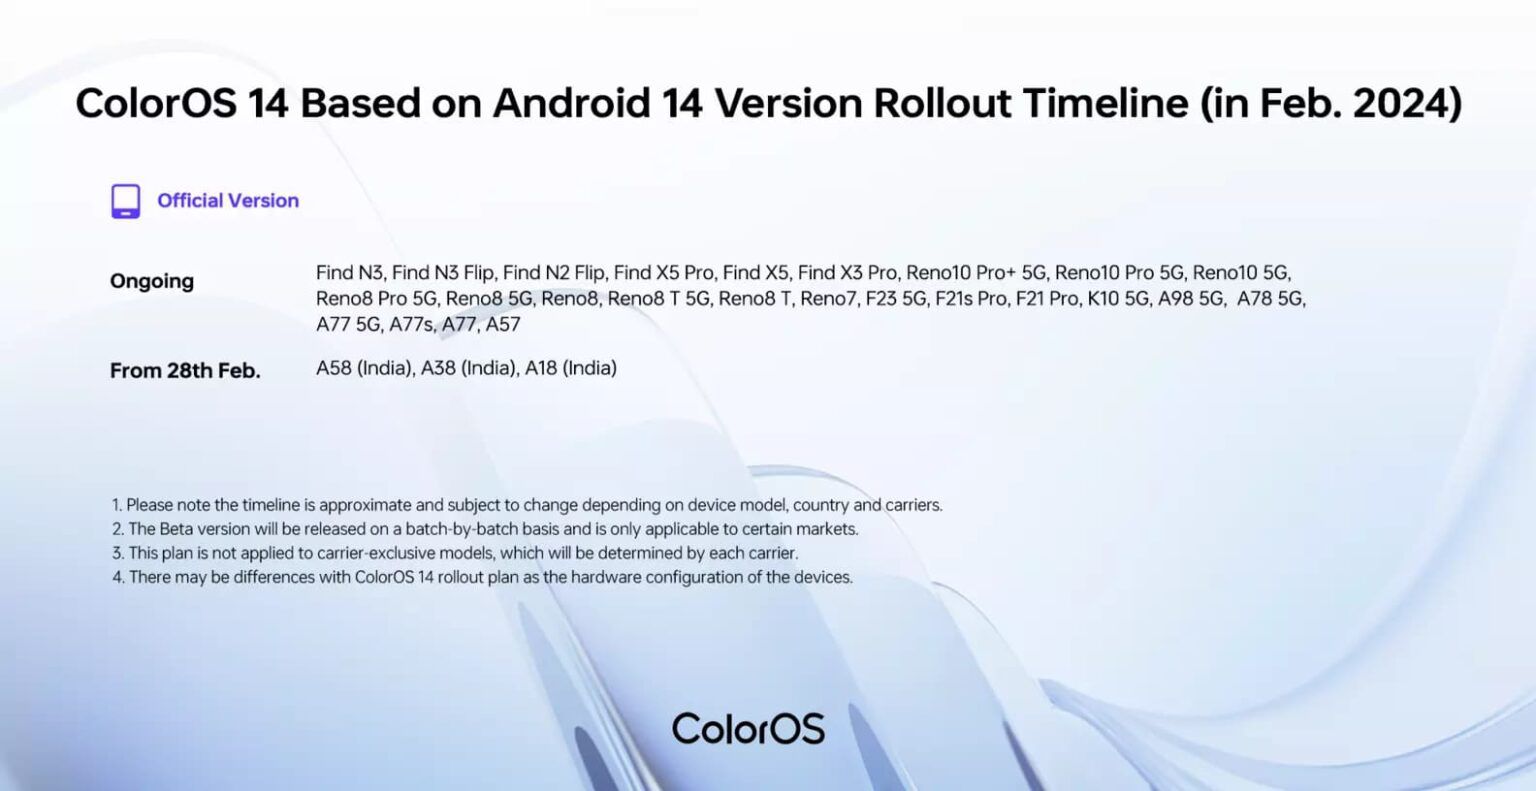 ColorOS 14 update scheduled for Oppo A18, A38, and A58 starting February 28